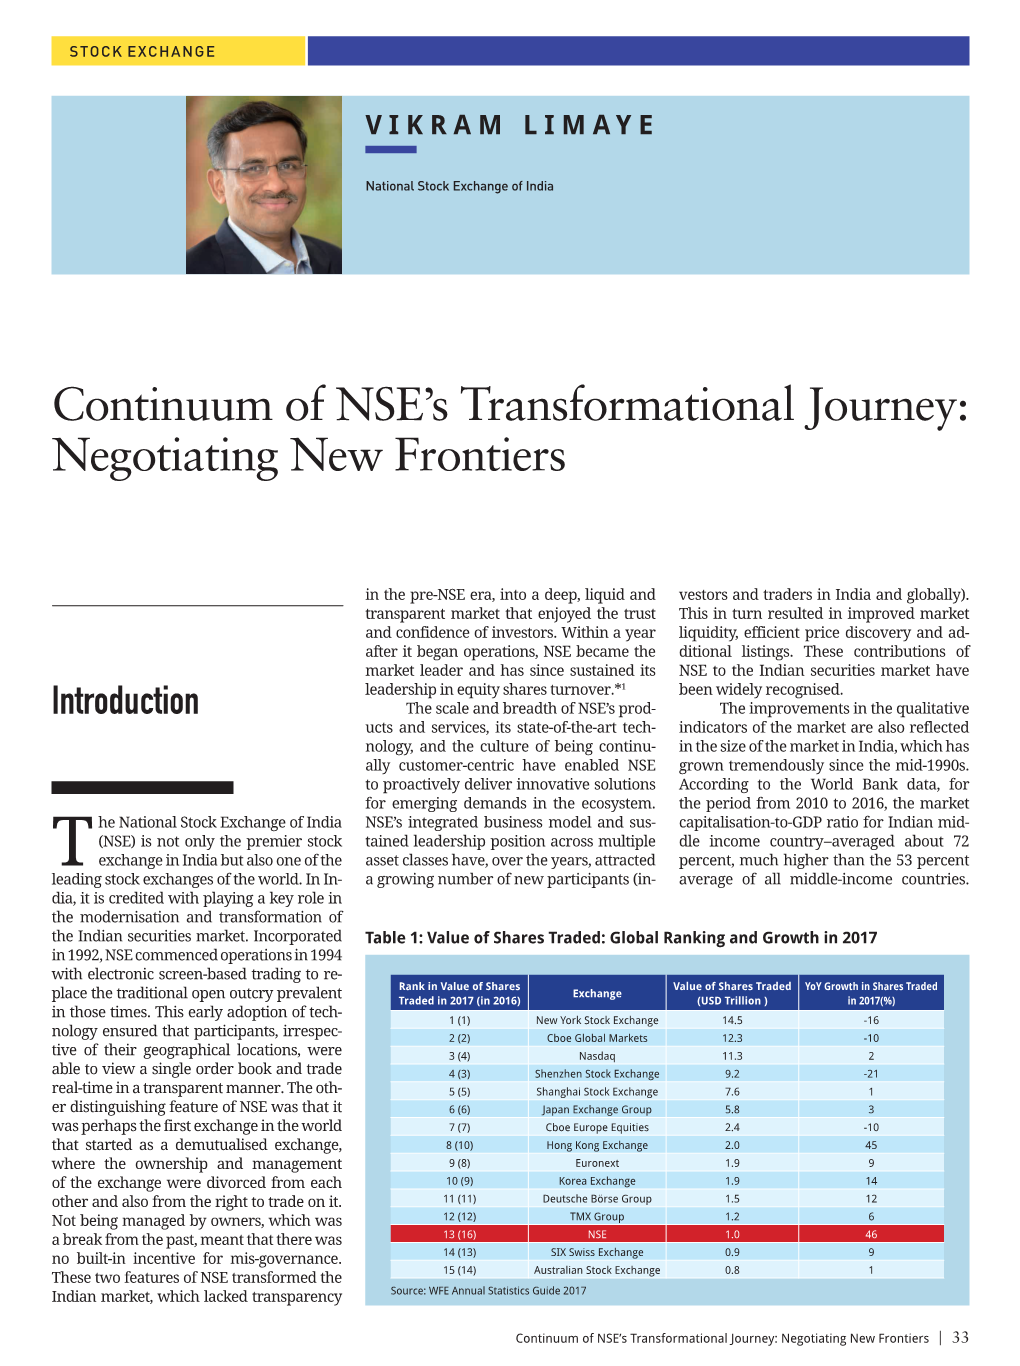 Continuum of NSE's Transformational Journey: Negotiating New Frontiers